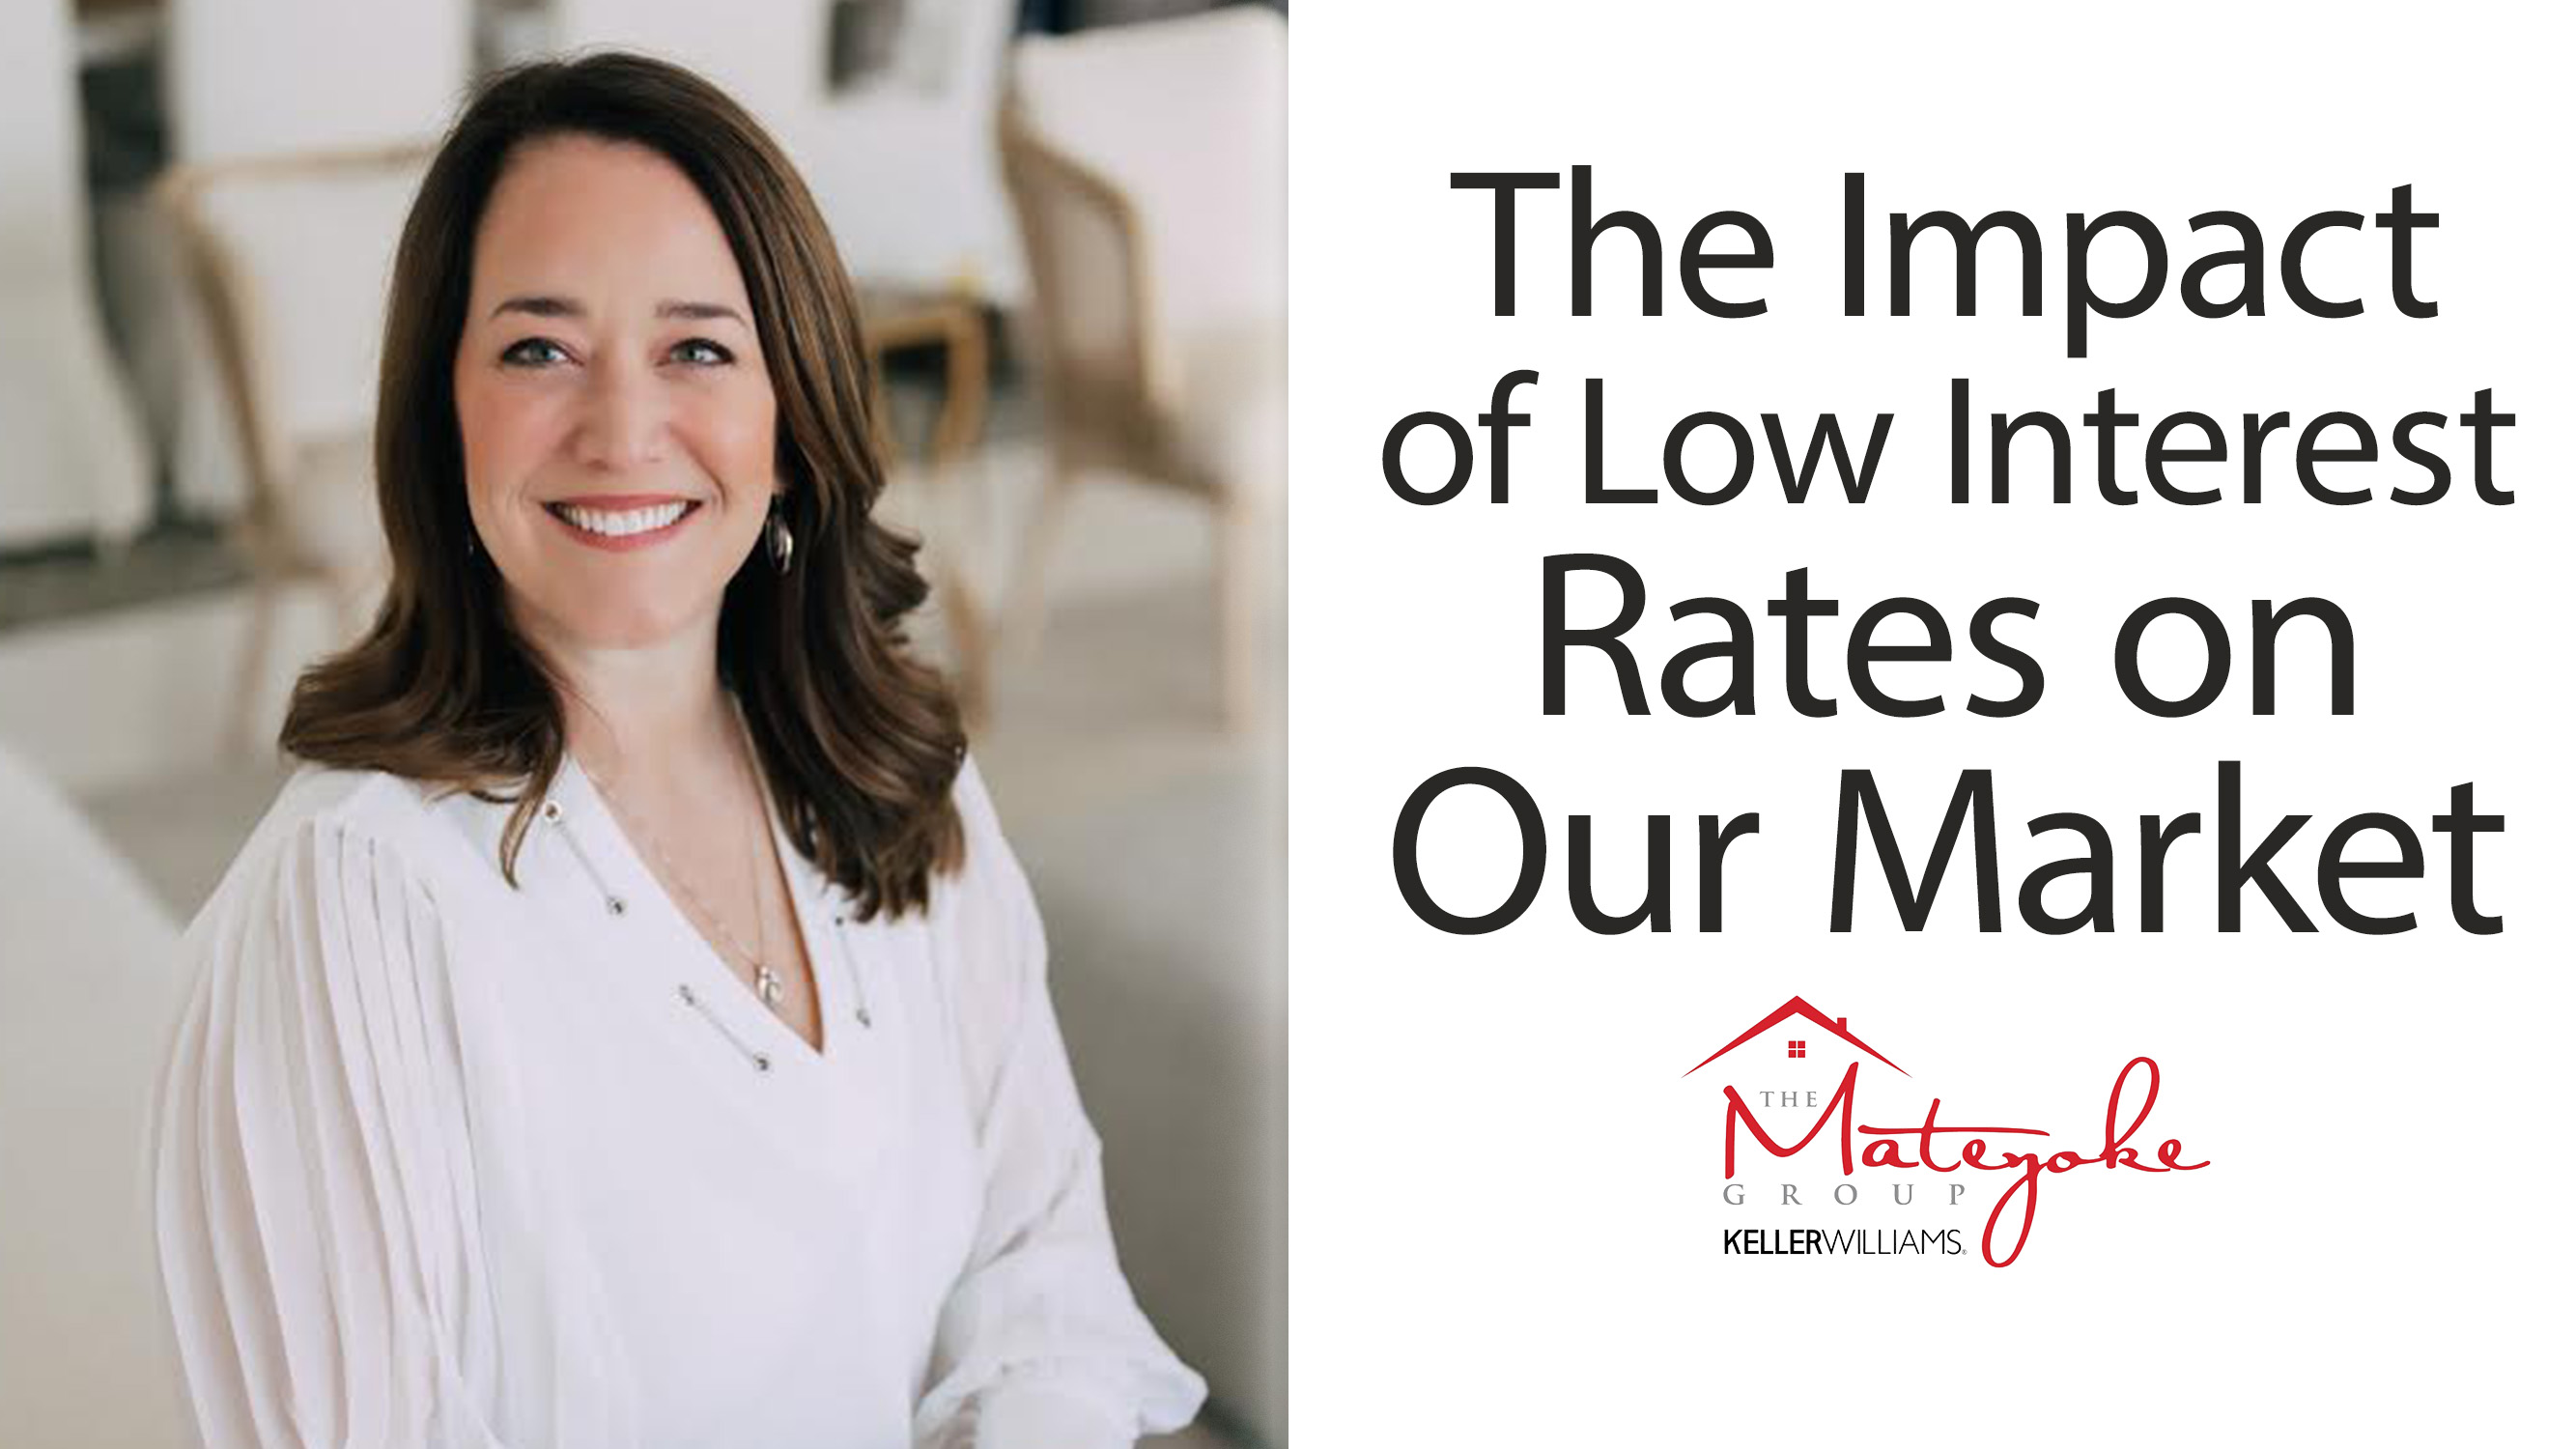 Why Low Interest Rates Are Good for Our Market